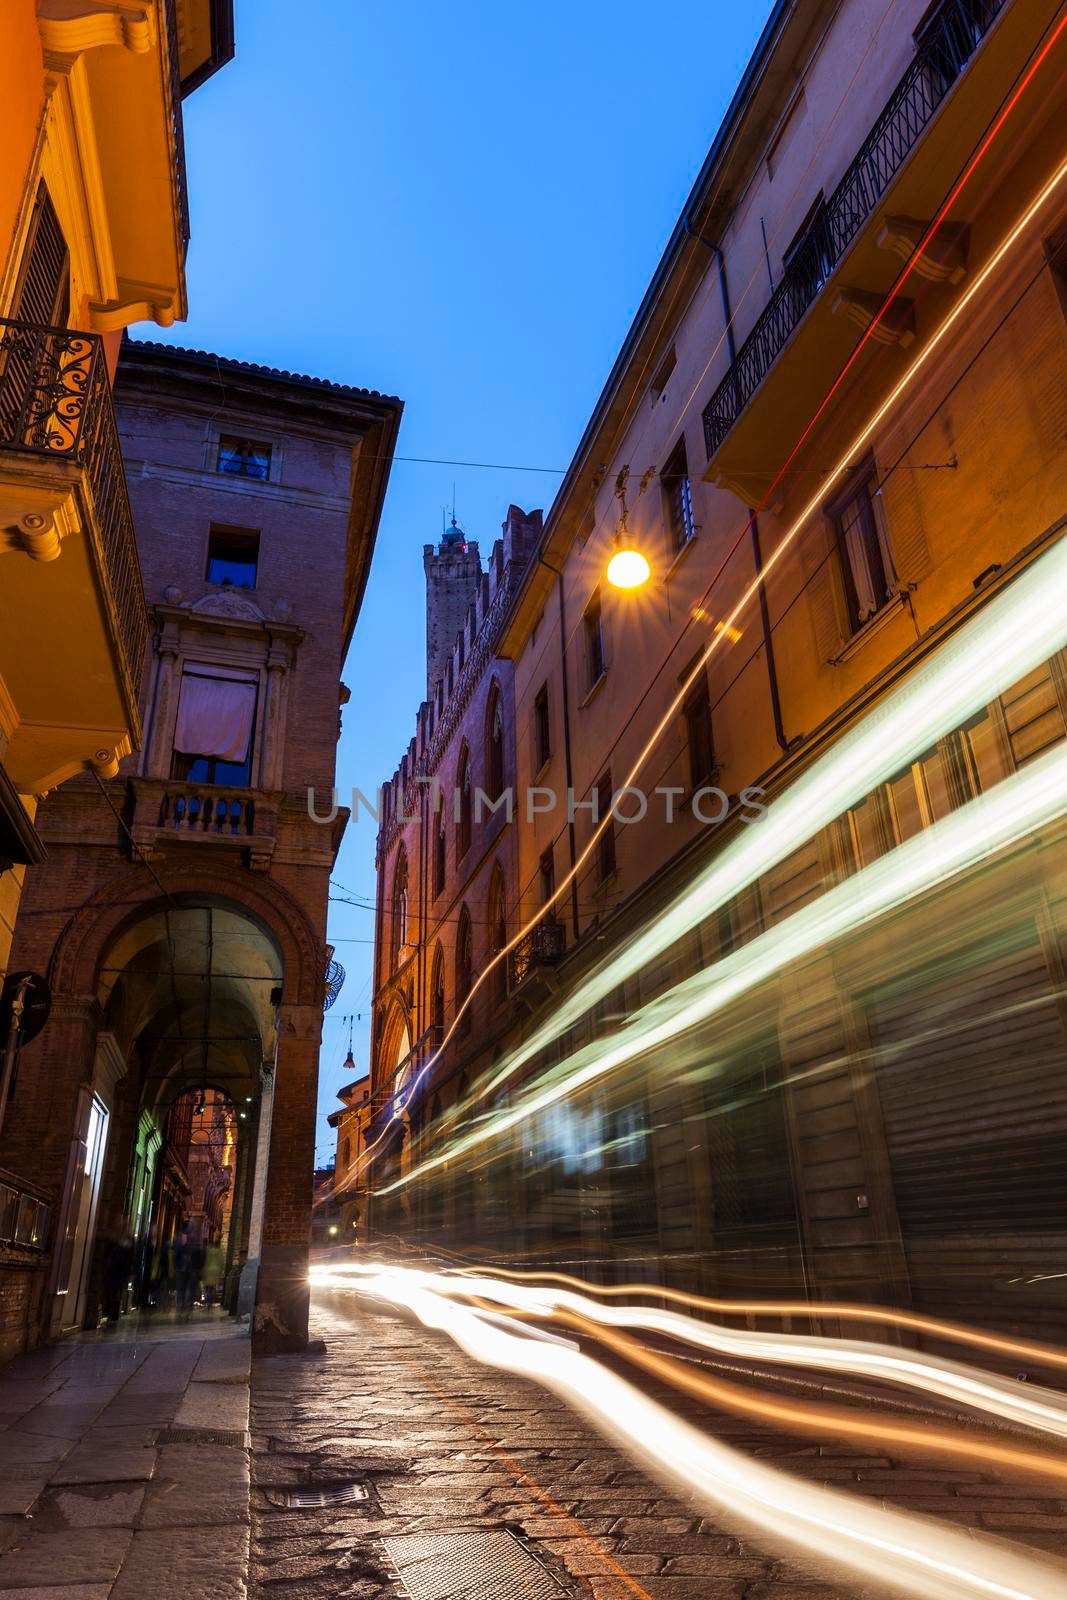 Architecture of Bologna by benkrut